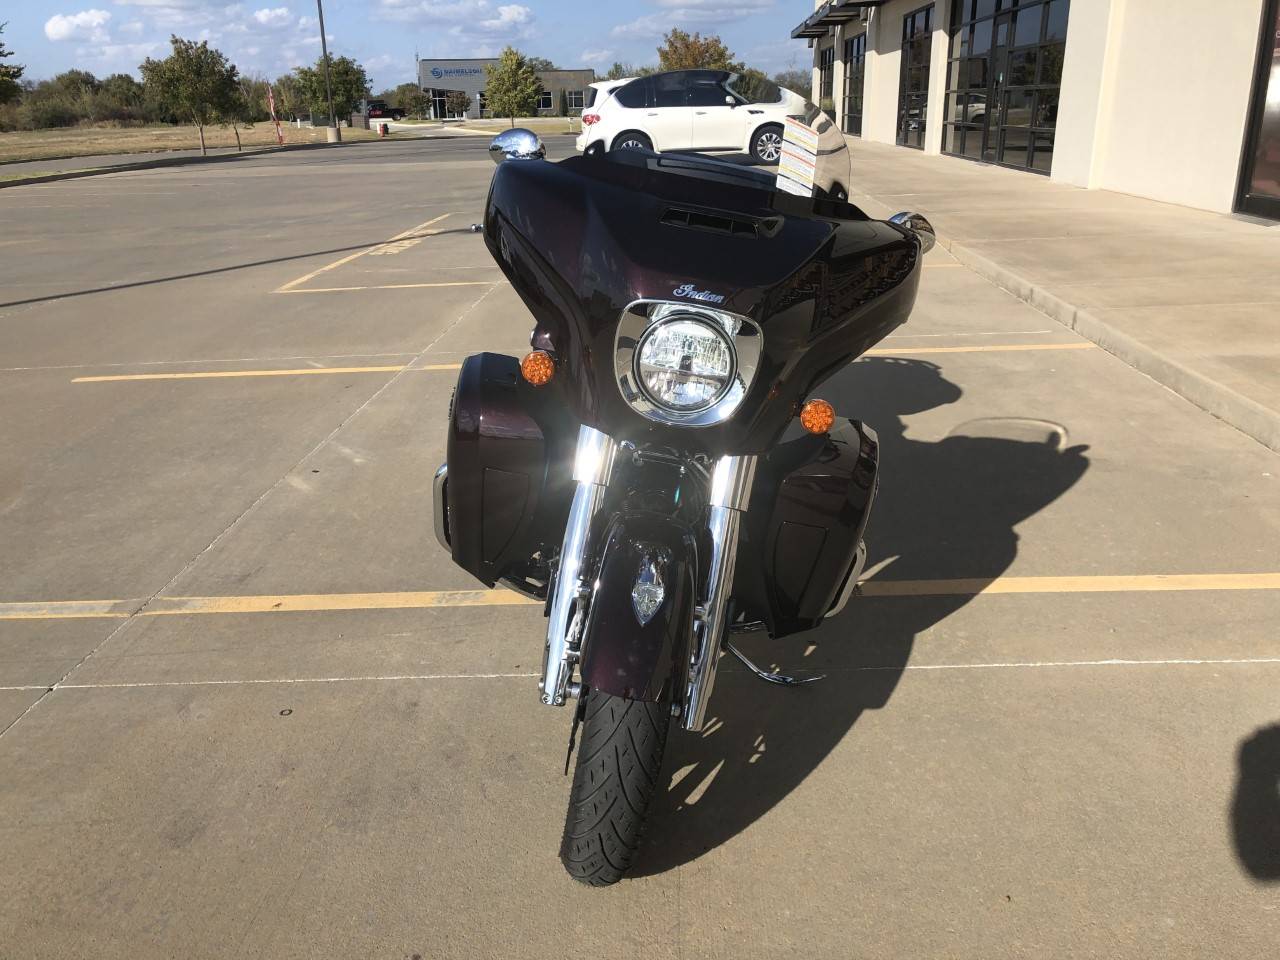 2021 Indian Roadmaster® Limited in Norman, Oklahoma - Photo 3